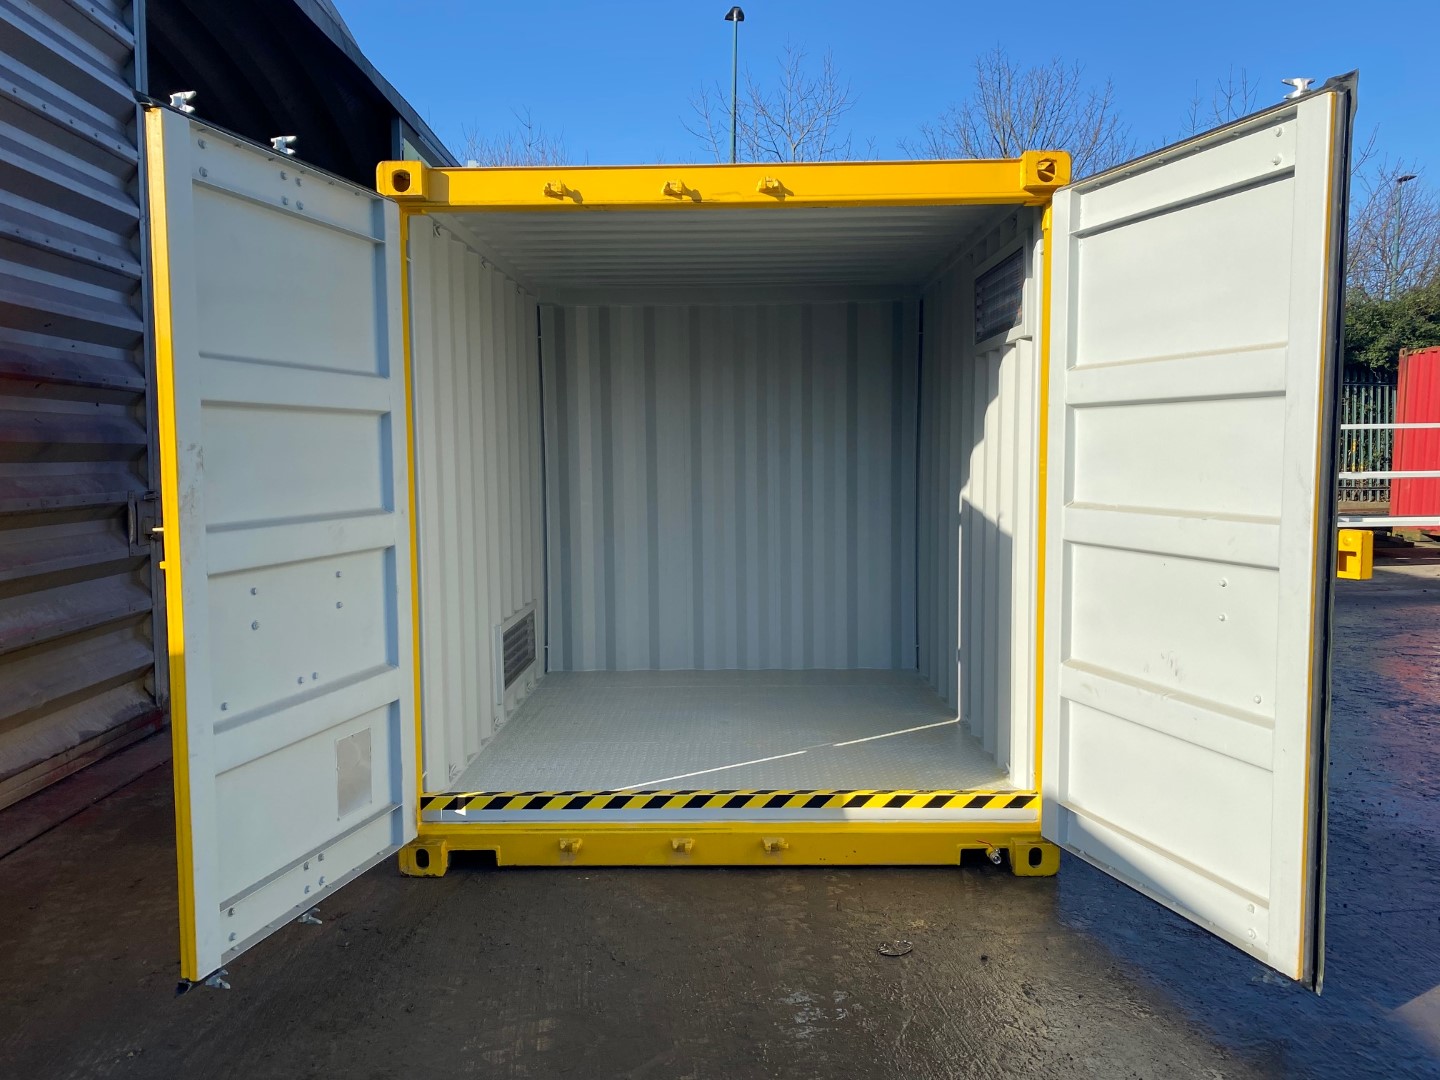 UK Suppliers of Secure Chemical Storage Units